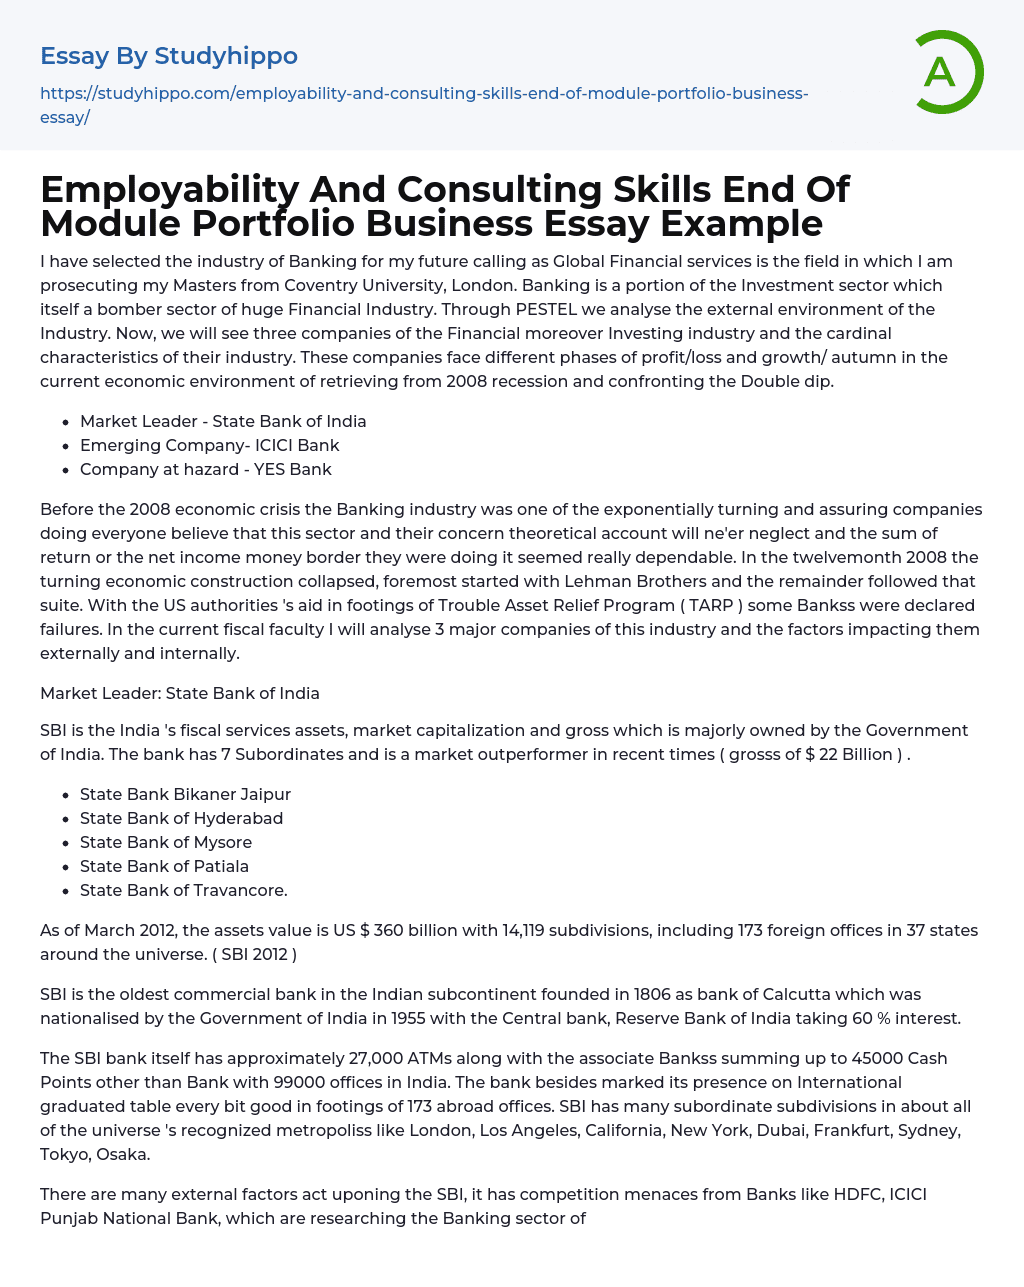 Employability And Consulting Skills End Of Module Portfolio Business Essay Example